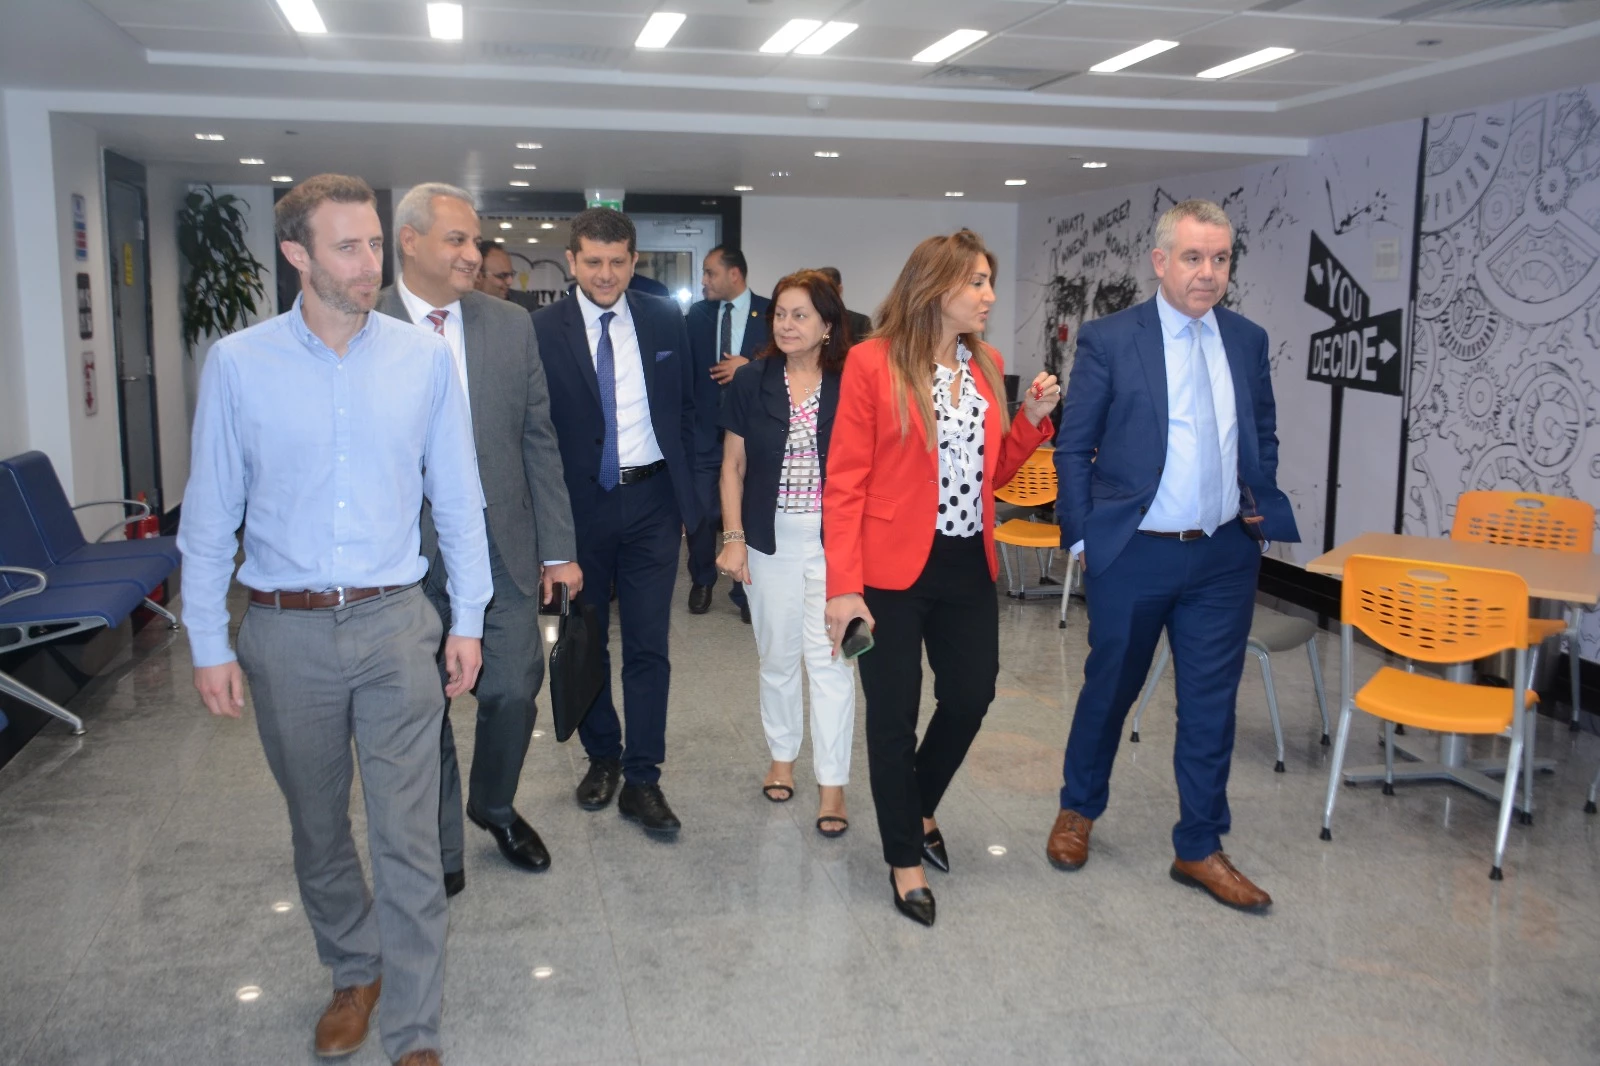 The Arab Academy for Science, Technology, and Maritime Transport (AASTMT) at Smart Village Campus welcomed a delegation from the University of Central Lancashire (UCLan)10